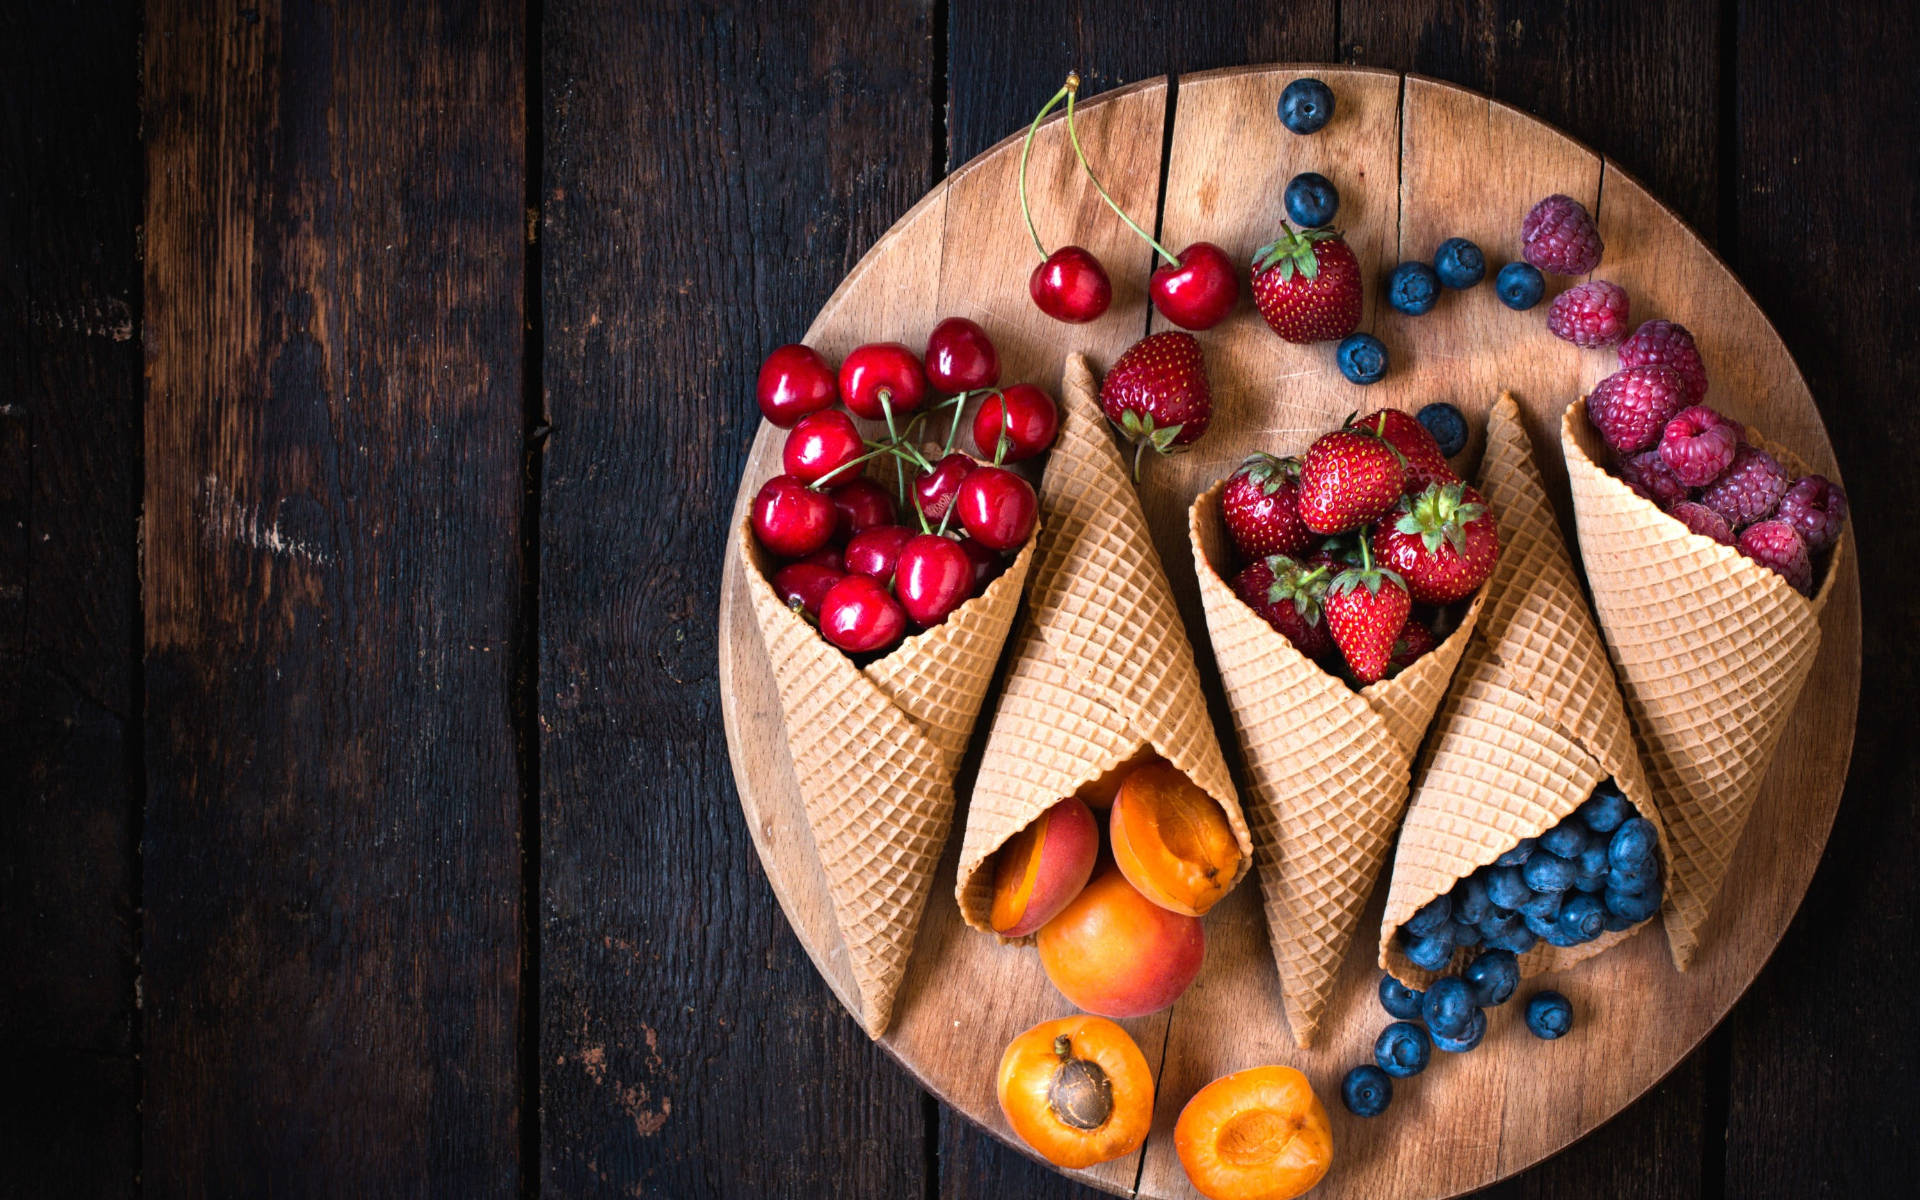 Cones Filled With Berries